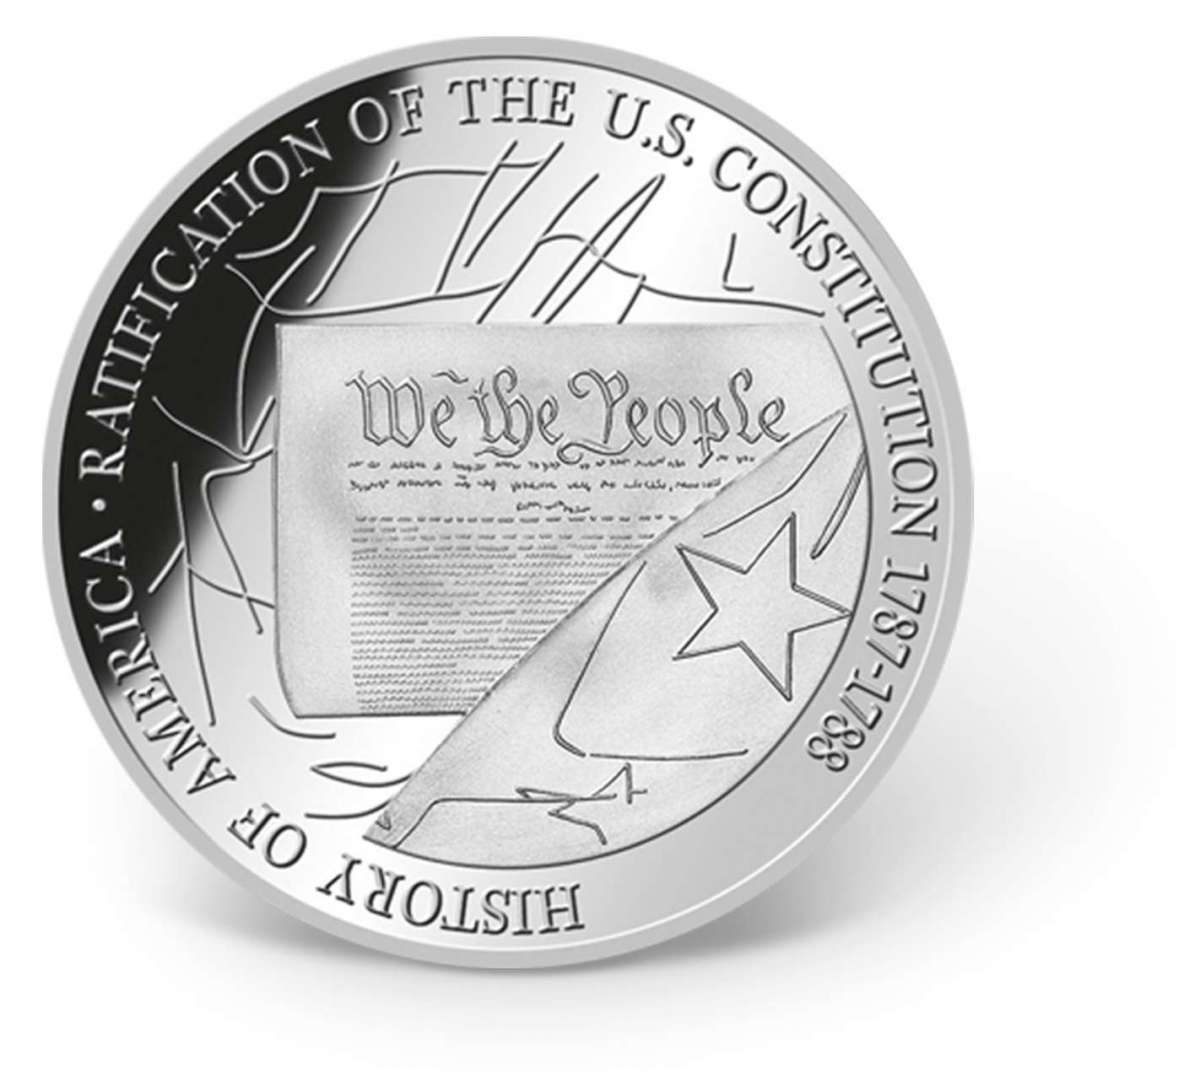 U.S. Constitution Precious Metal Coin Set | Gold-Layered ...